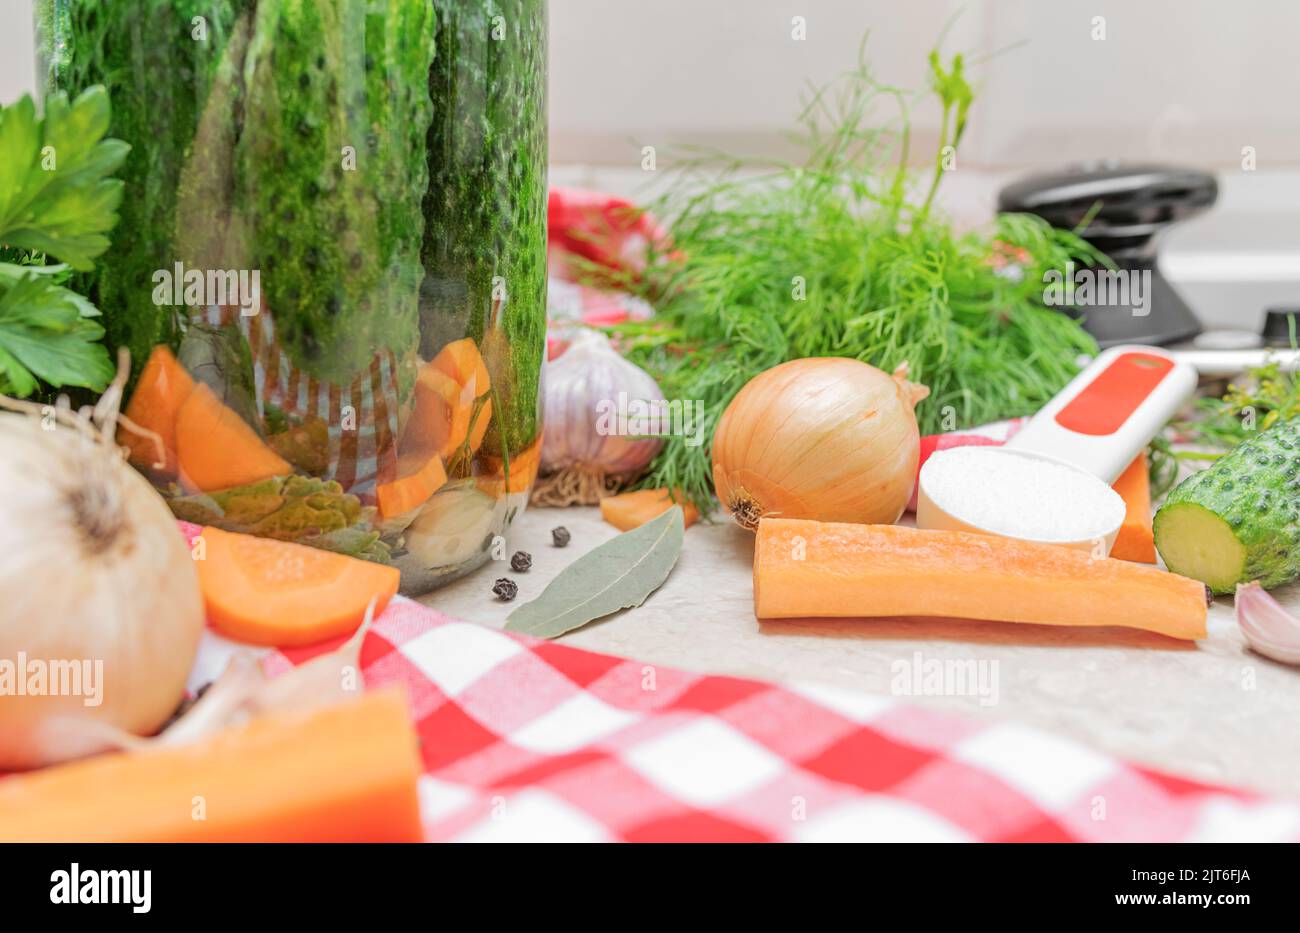 A set of vegetables and spices for cucumber marinade. Stock Photo